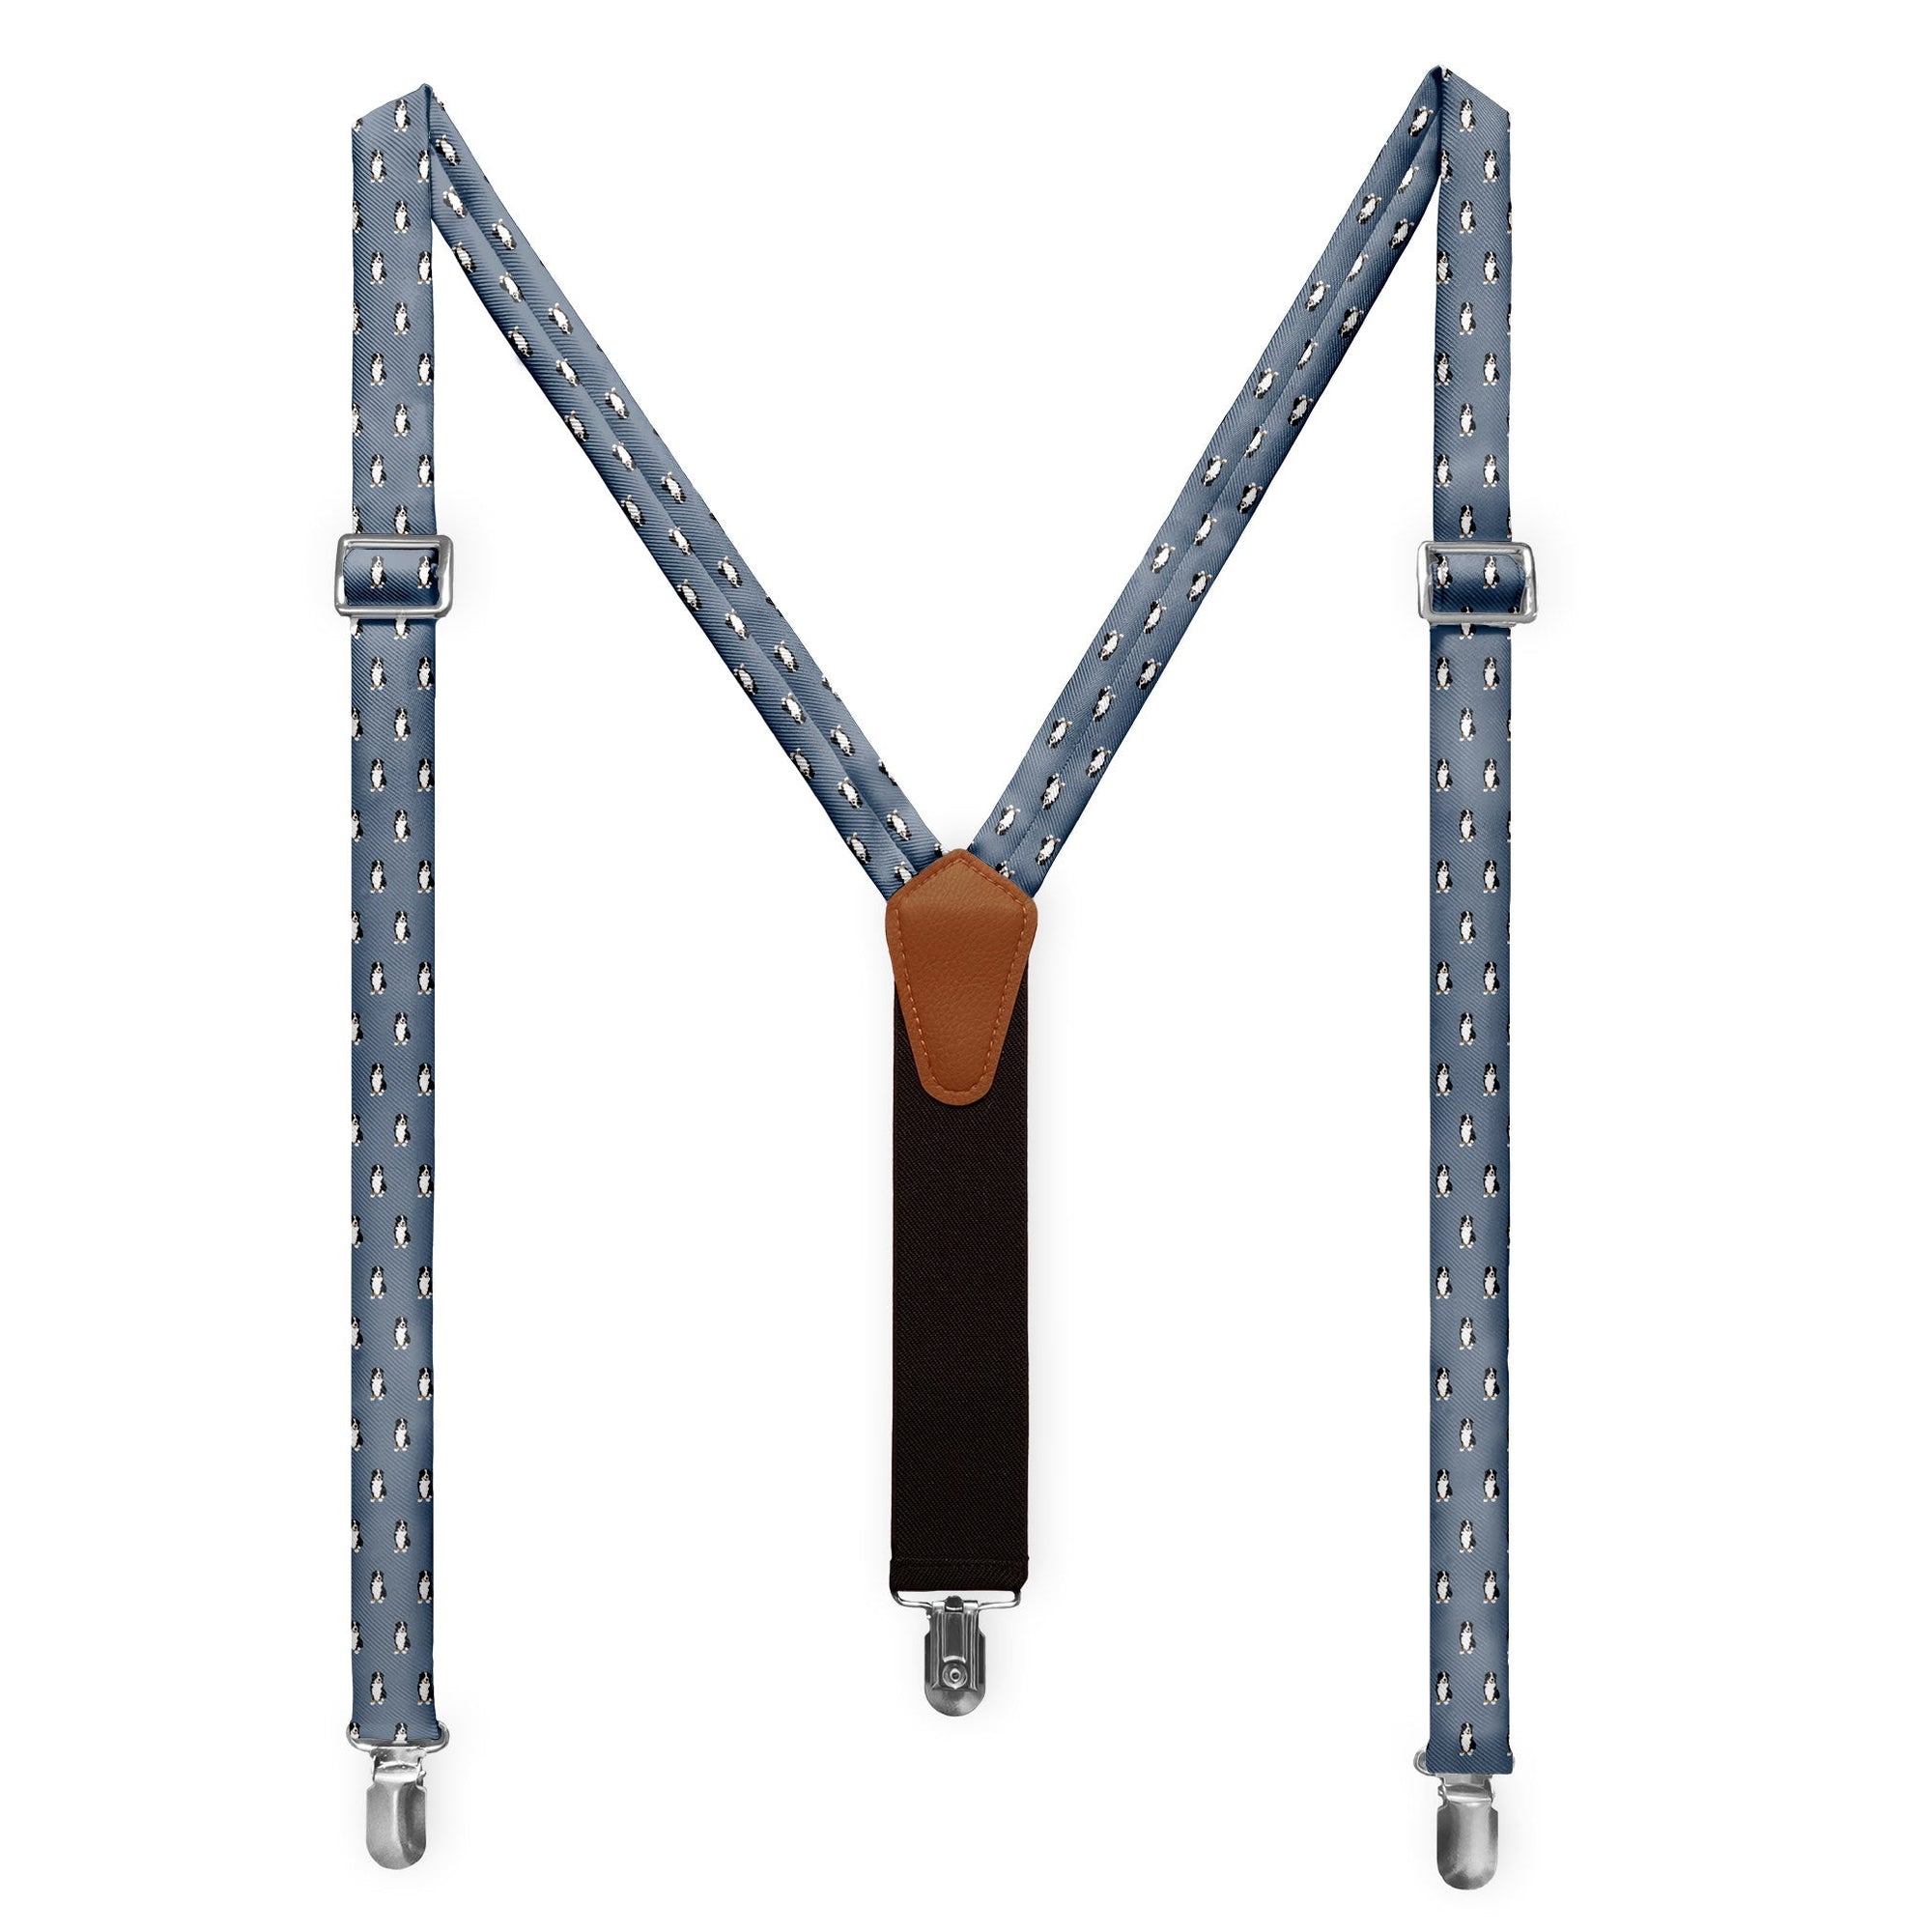 Bernese Mountain Dog Suspenders -  -  - Knotty Tie Co.